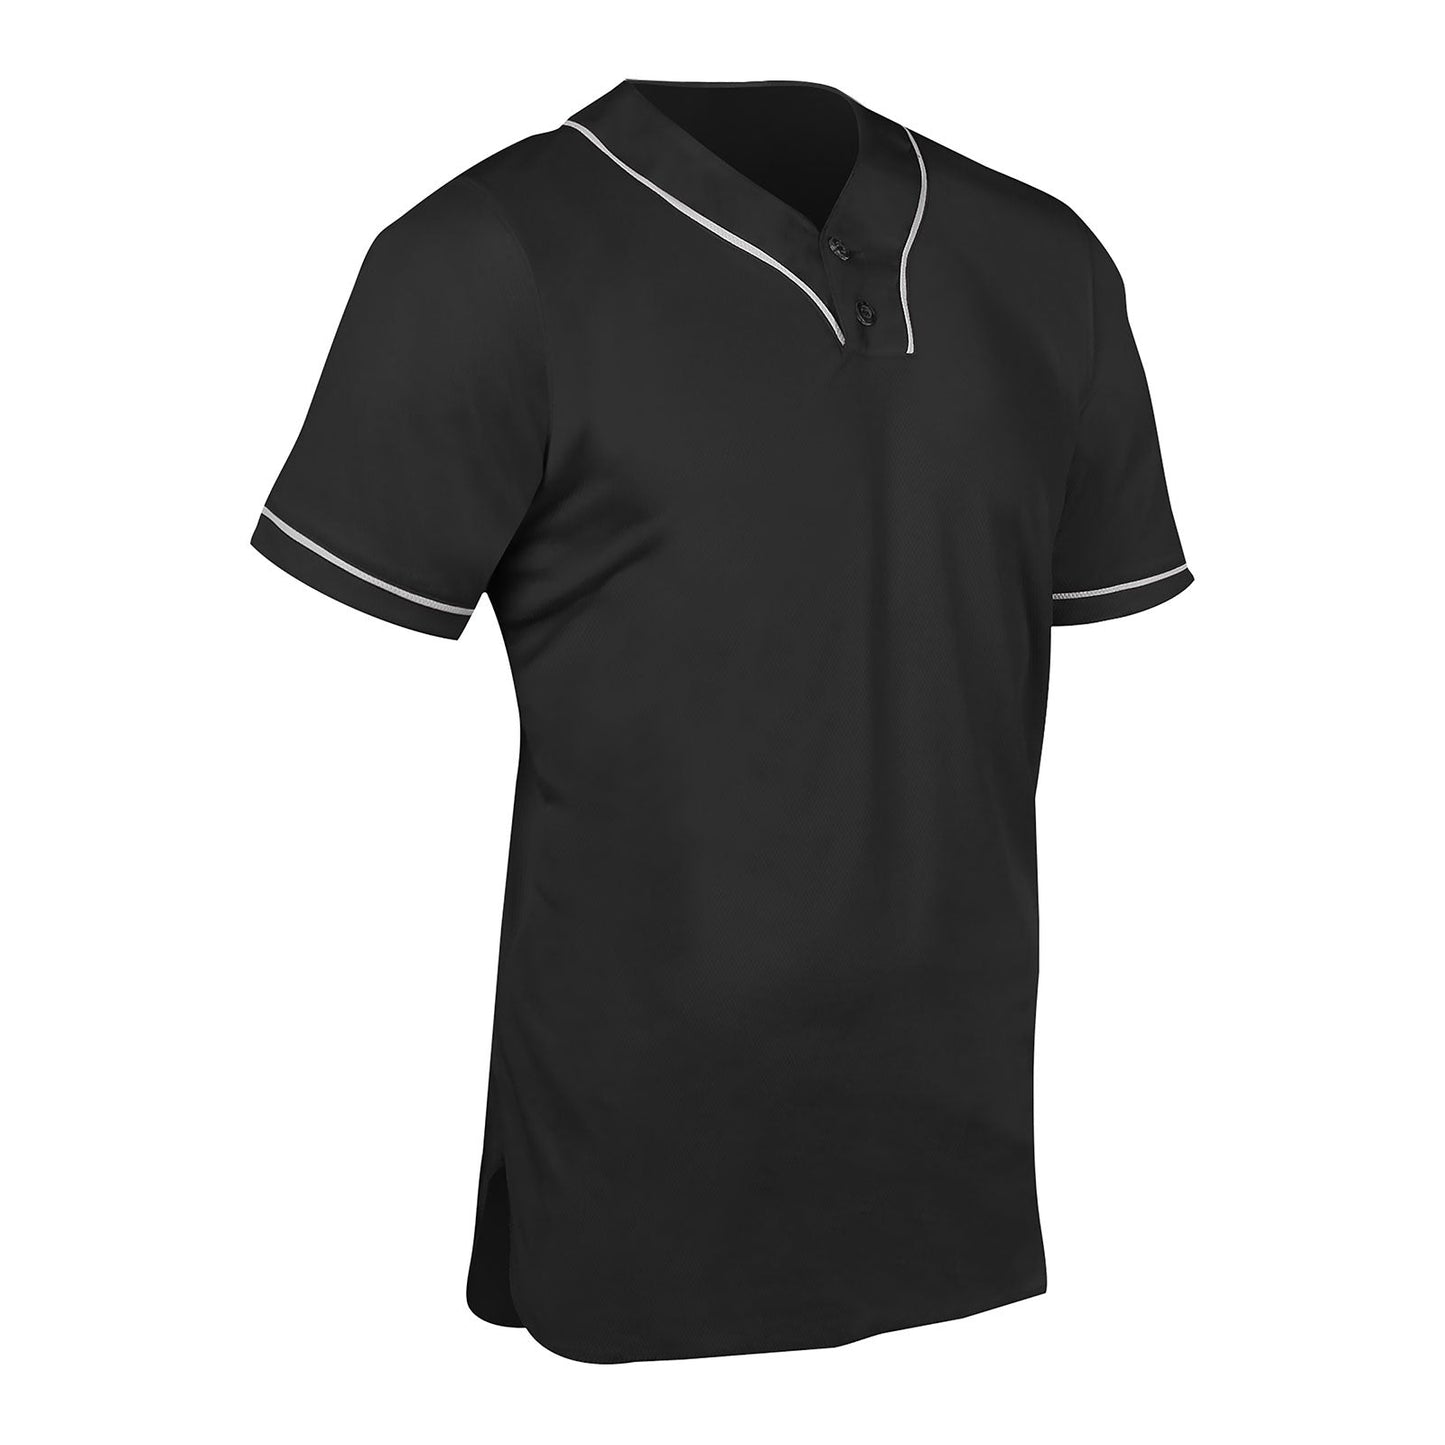 Heater 2-Button Piped Baseball Jersey BLACK BODY, WHITE PIPE